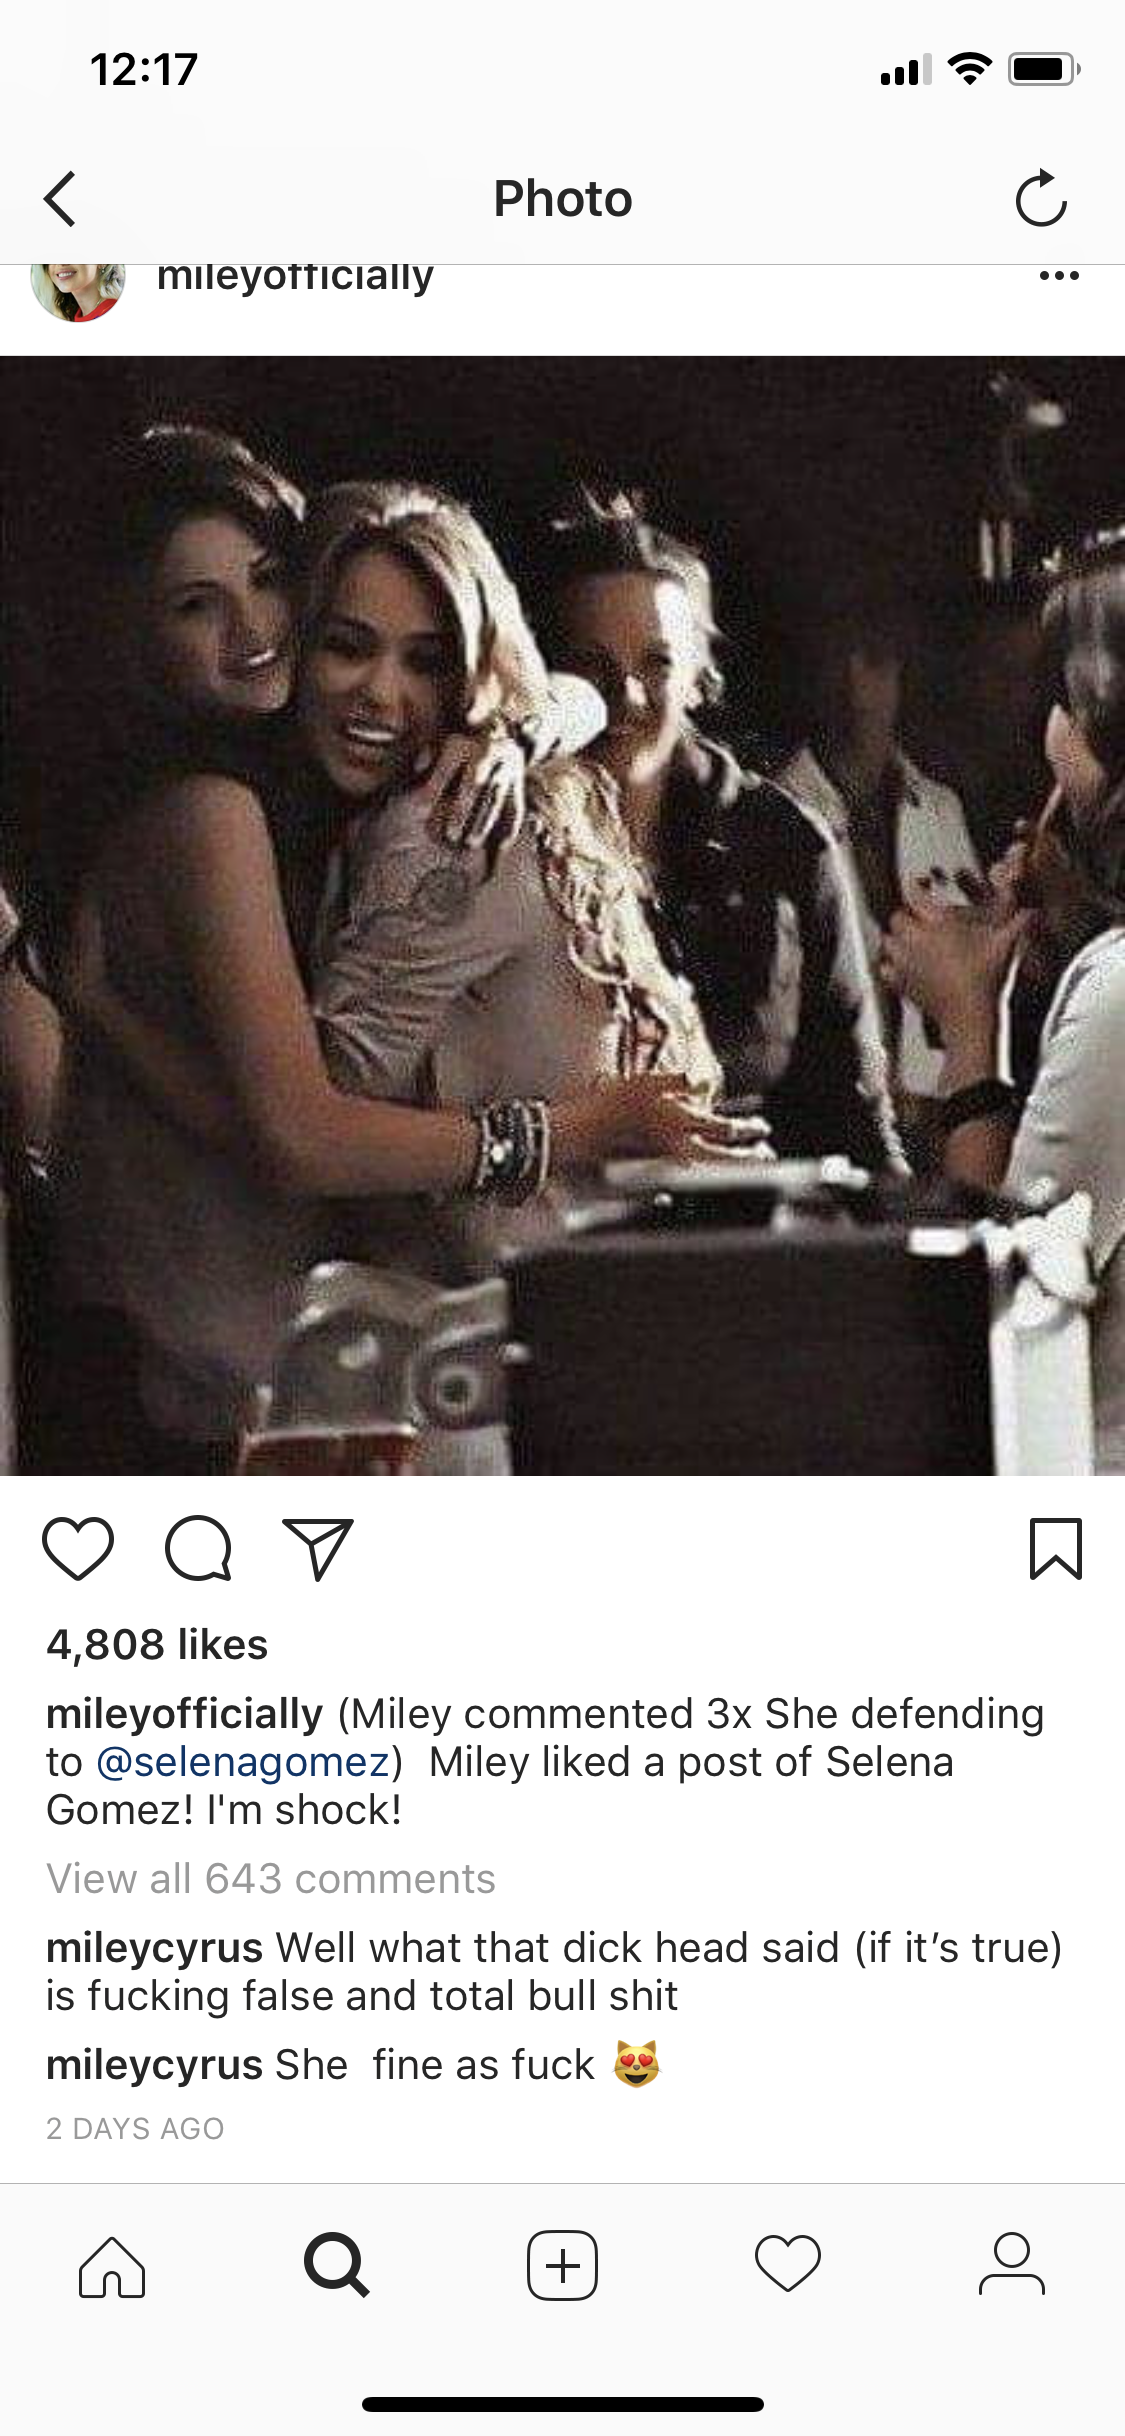 dolce and gabbana selena gomez comment